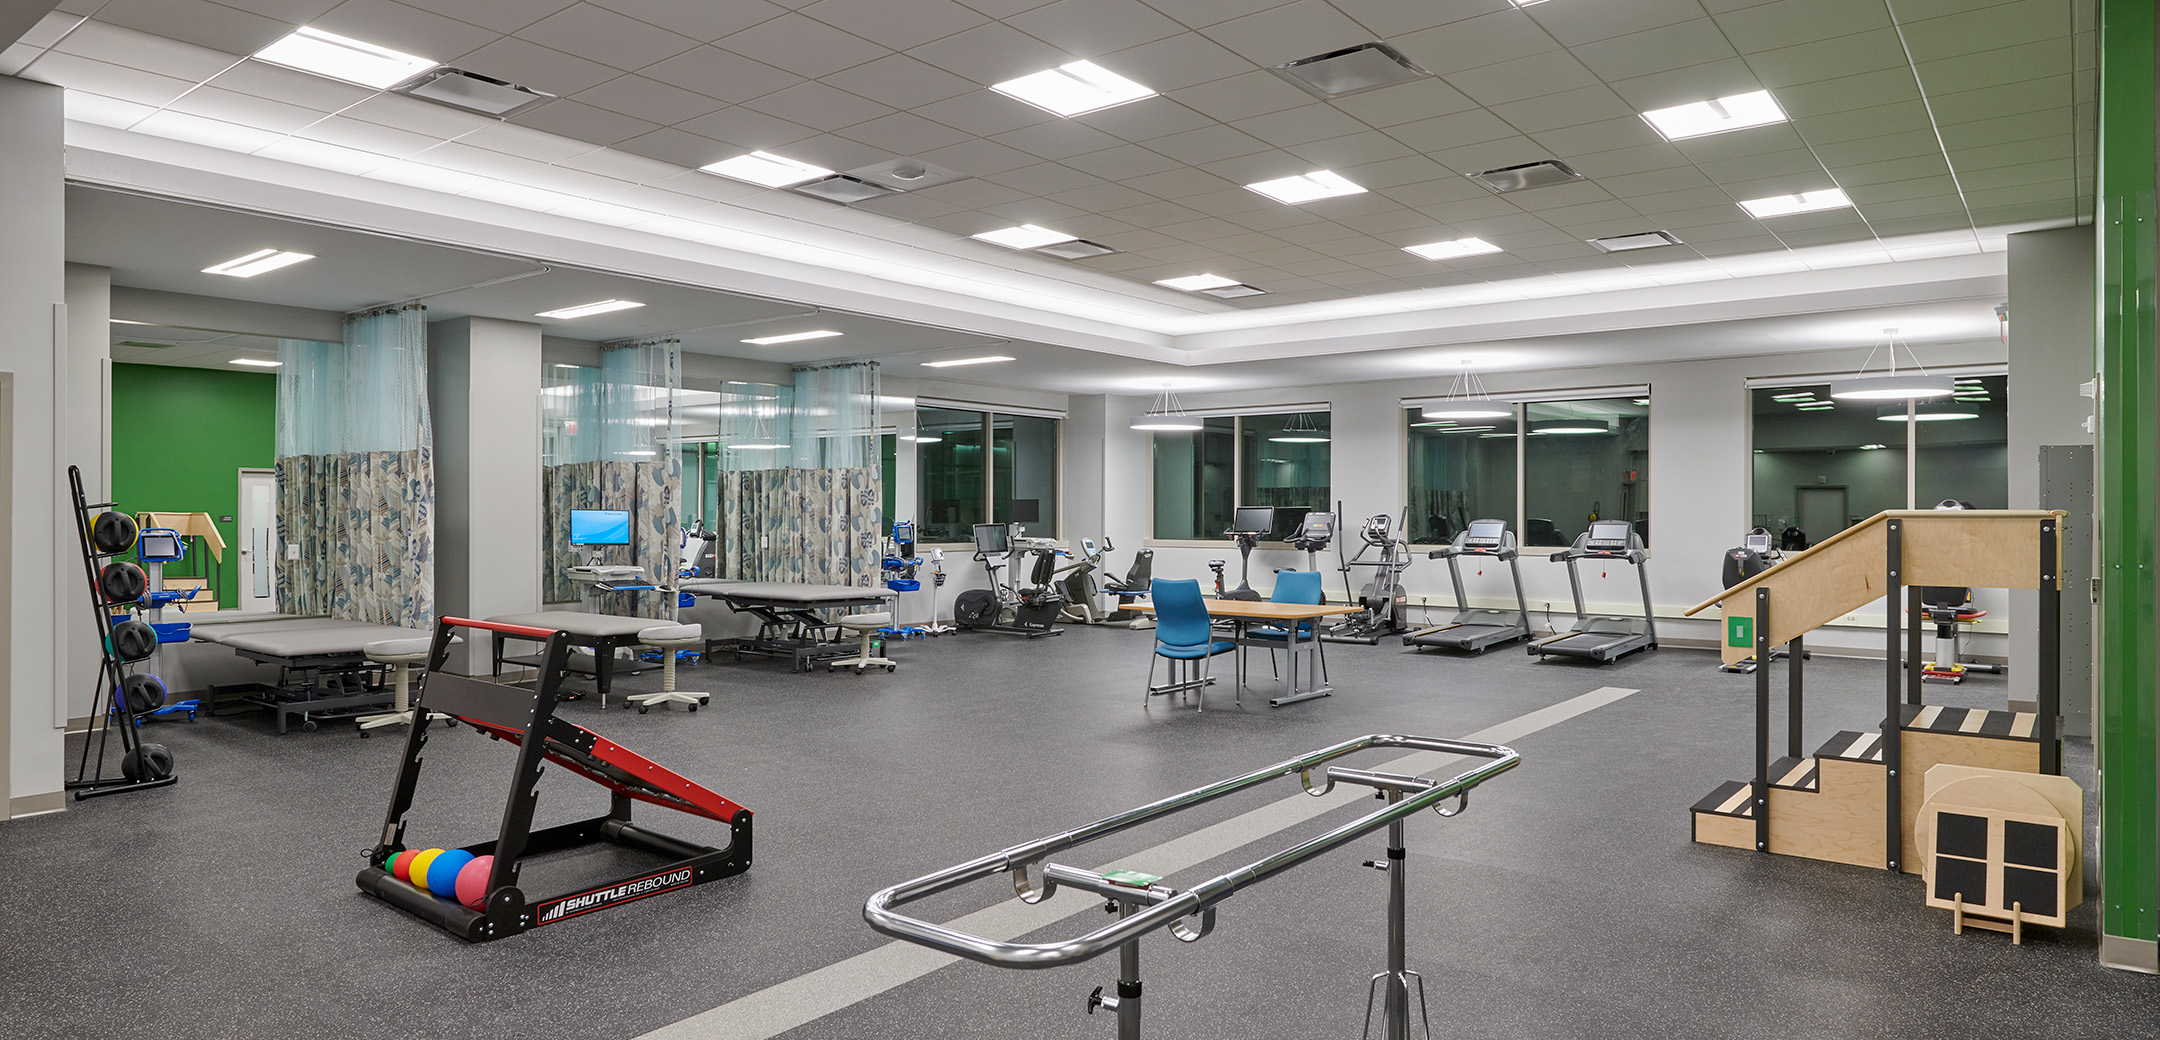 An angled interior view of the Main Line Women's Health Center showcasing the rehab facilities including stretching, cardio and assisting training equipment.